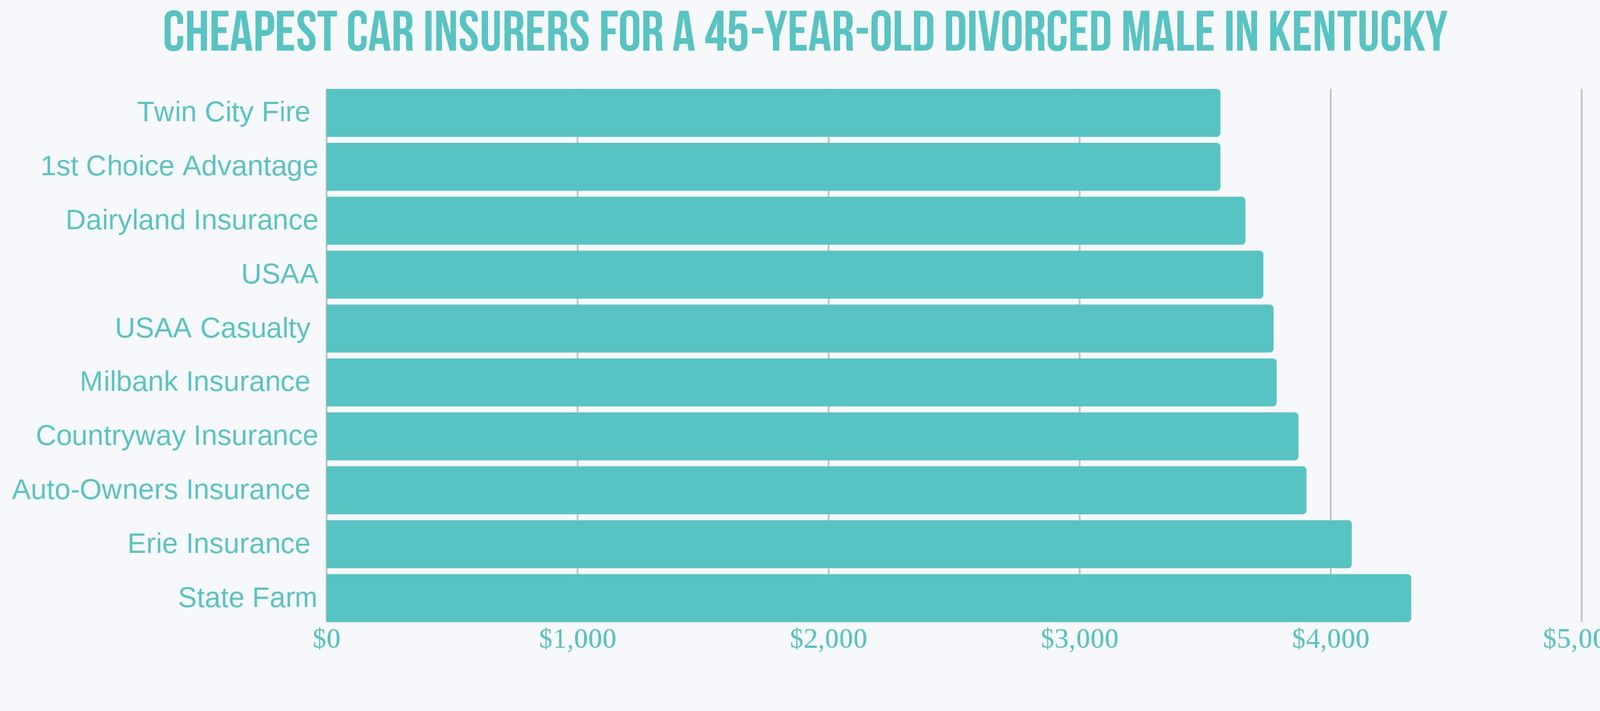 Kentucky's cheapest insurers for 45-year-old divorced male